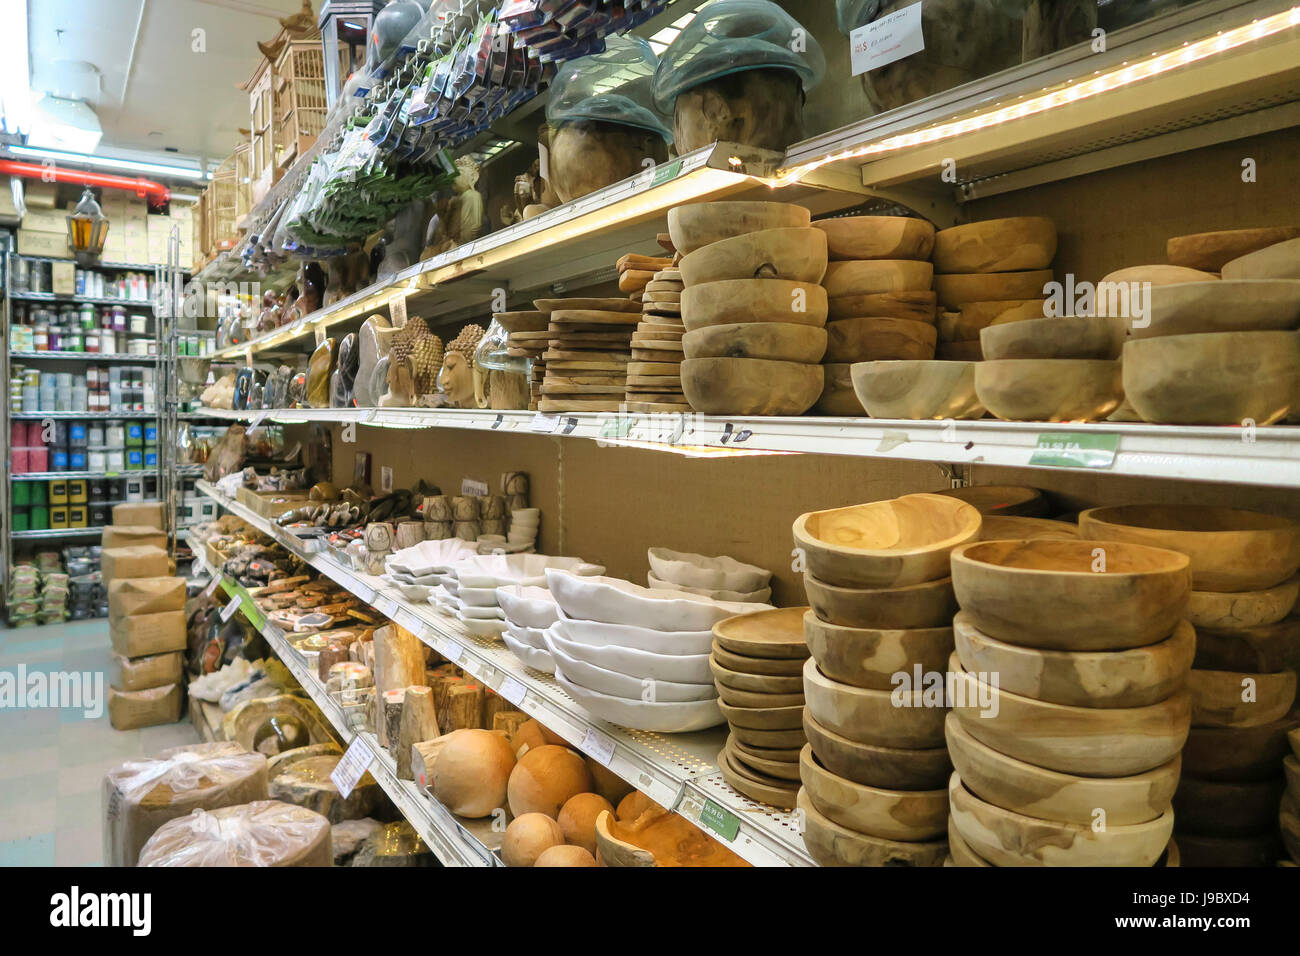 Jamali Floral & Garden Supplies in the Flower District, New York City, USA Stock Photo